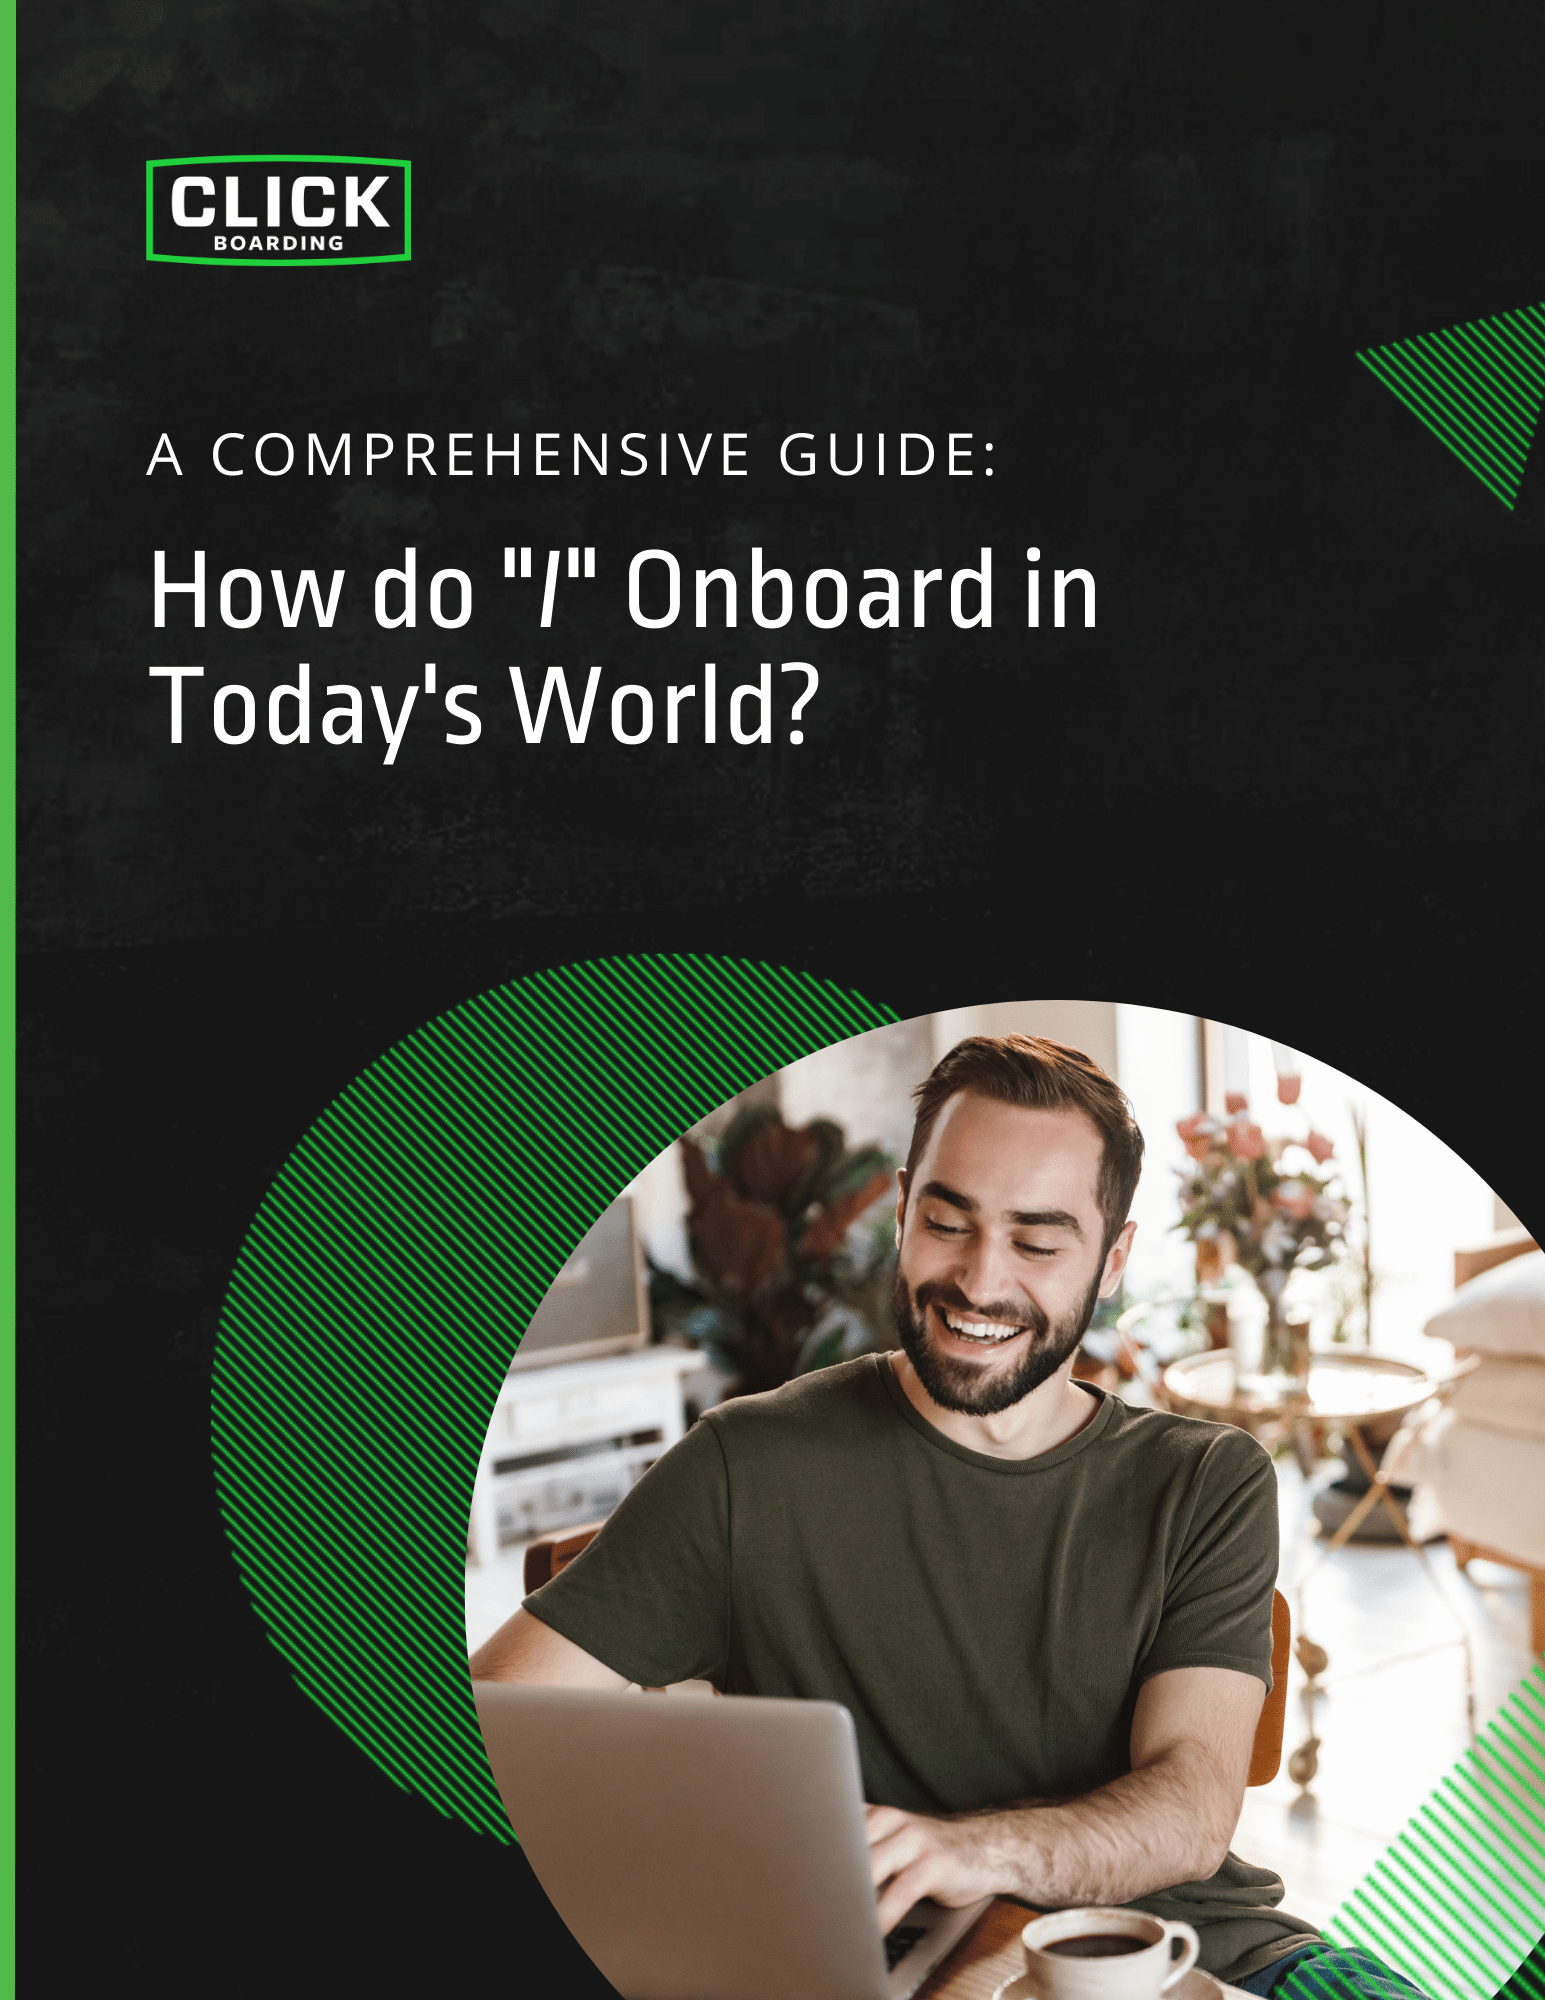 Onboarding during the pandemic: How Do 